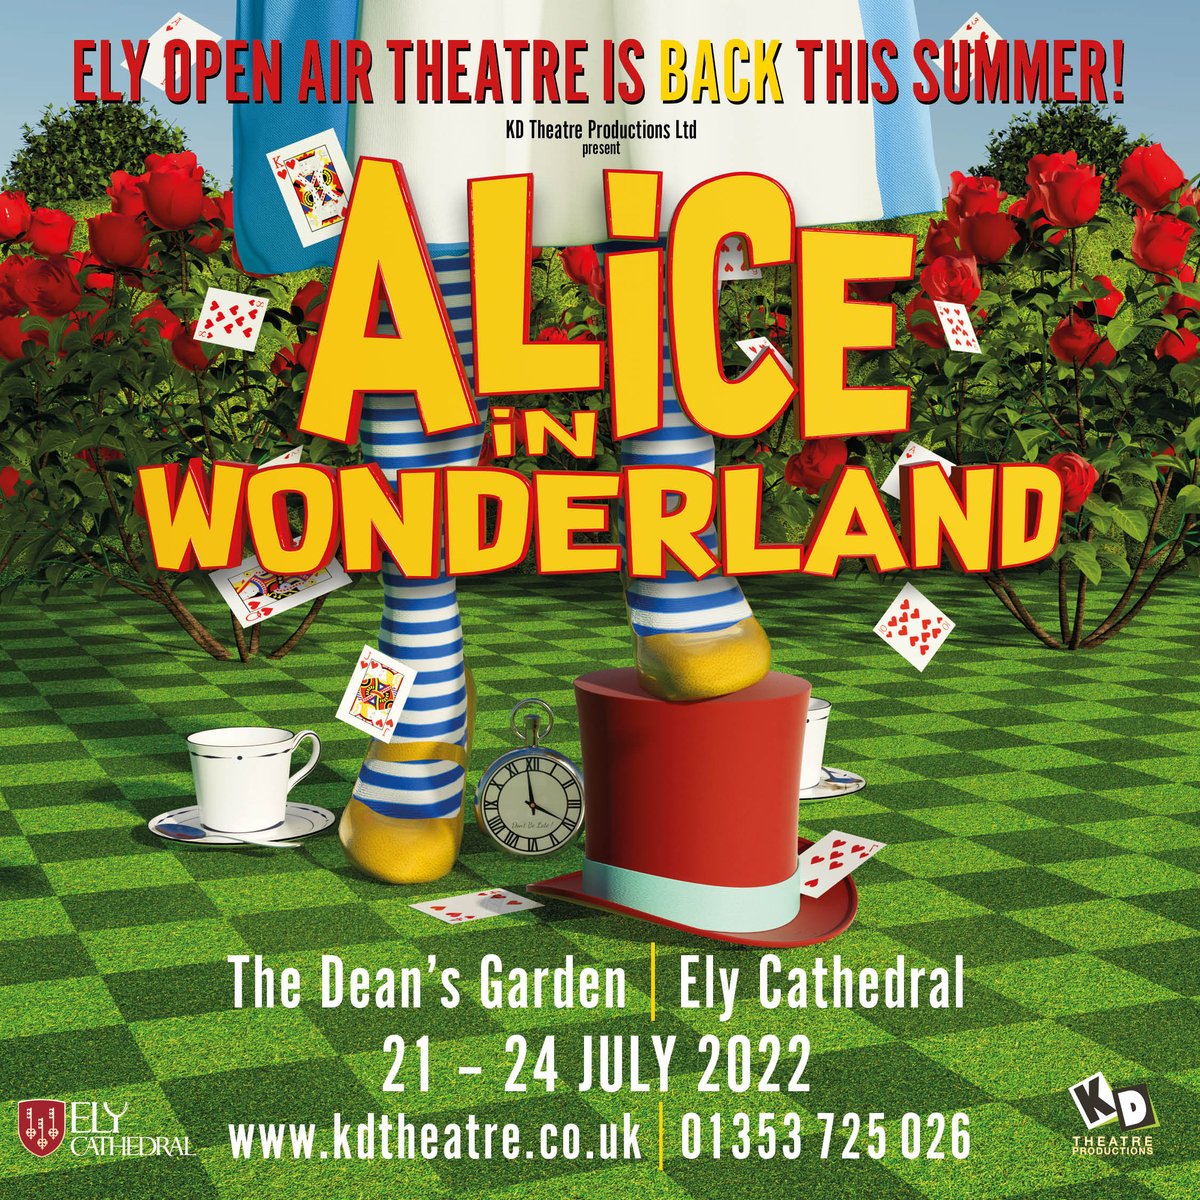 Join Alice down the rabbit hole in her magical adventures through Wonderland in this brand-new open-air adaptation of ‘Alice In Wonderland.’ @visitely @Ely_Cathedral @SpottedInEly